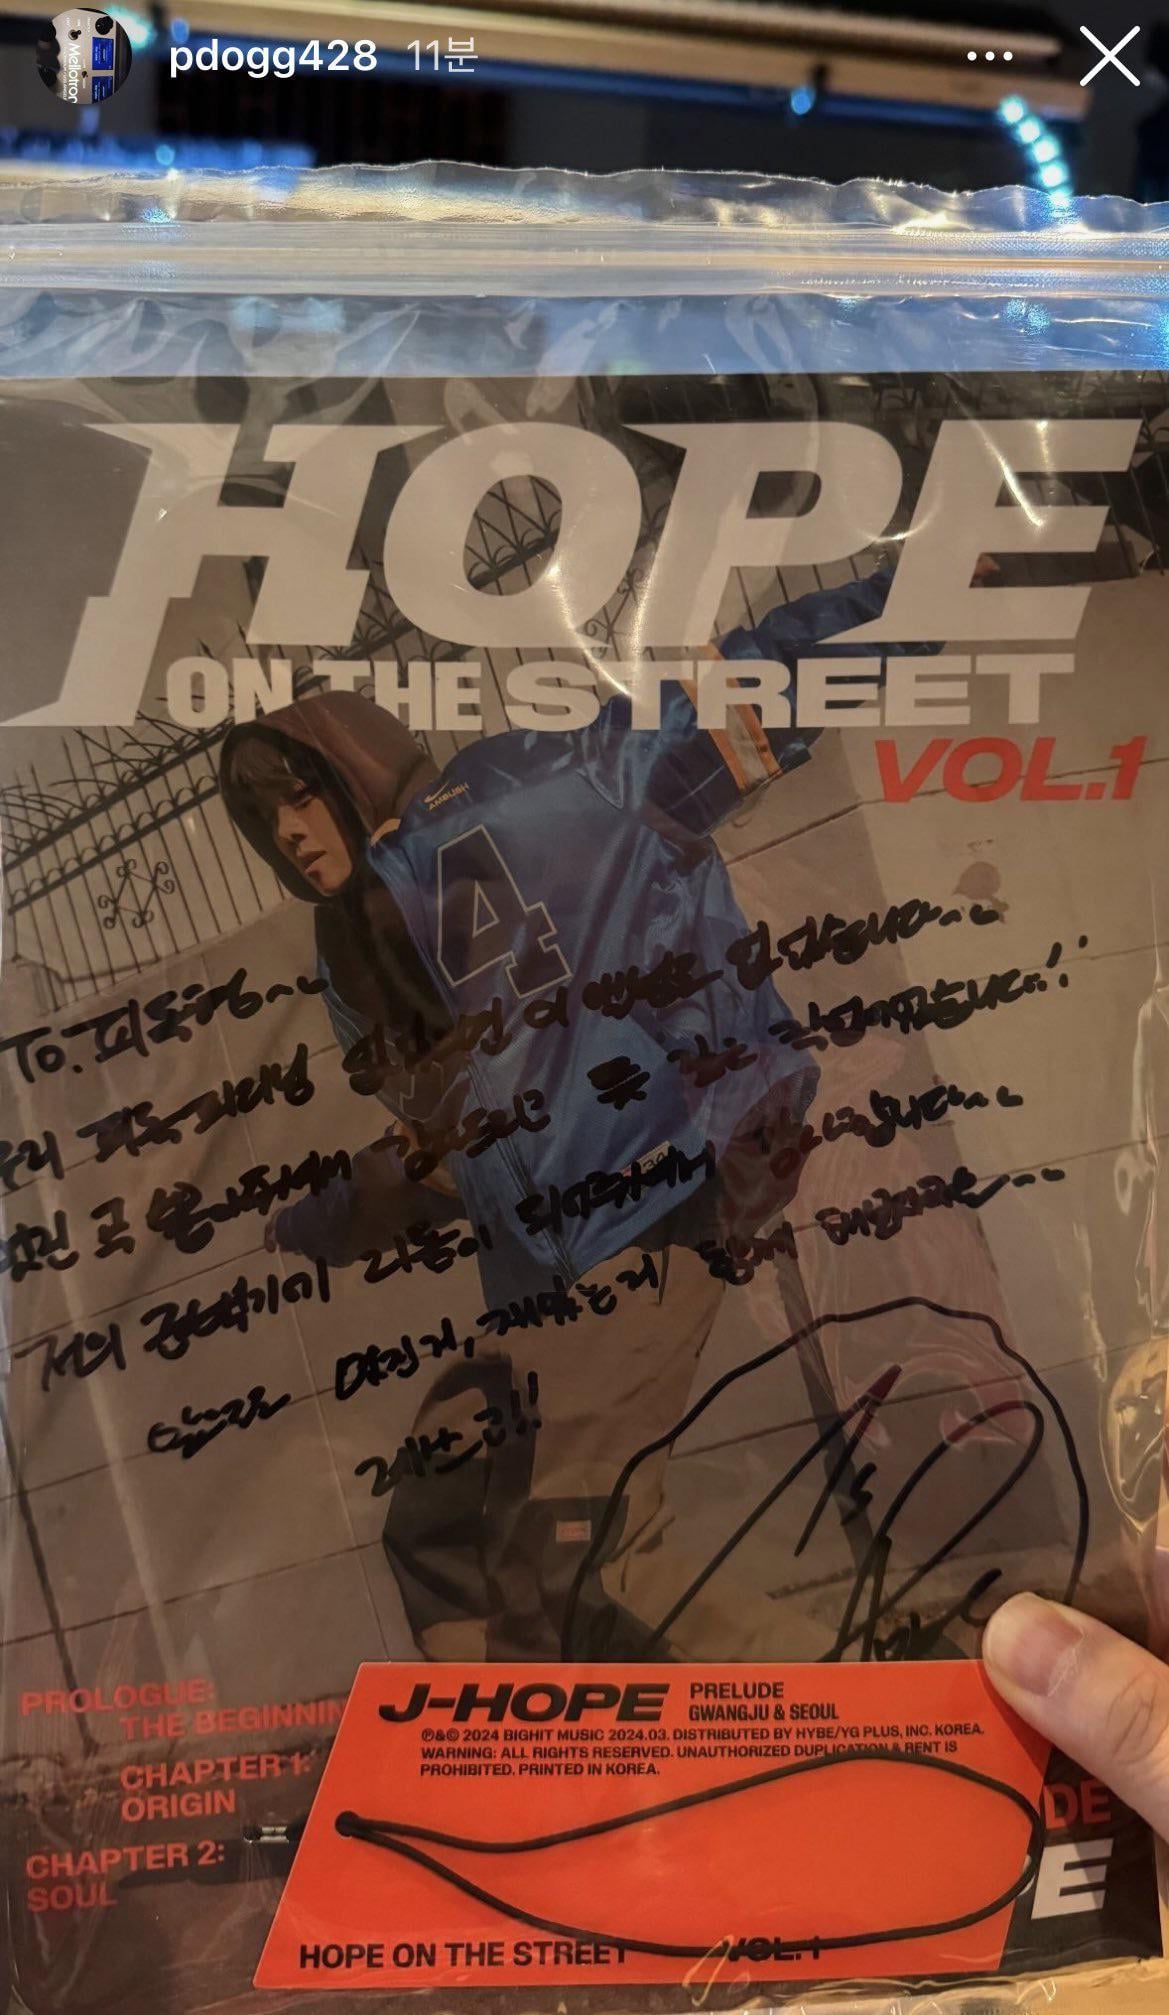 pdogg IG Story with Hobi’s “HOPE ON THE STREET VOL. 1” signed album - 150424